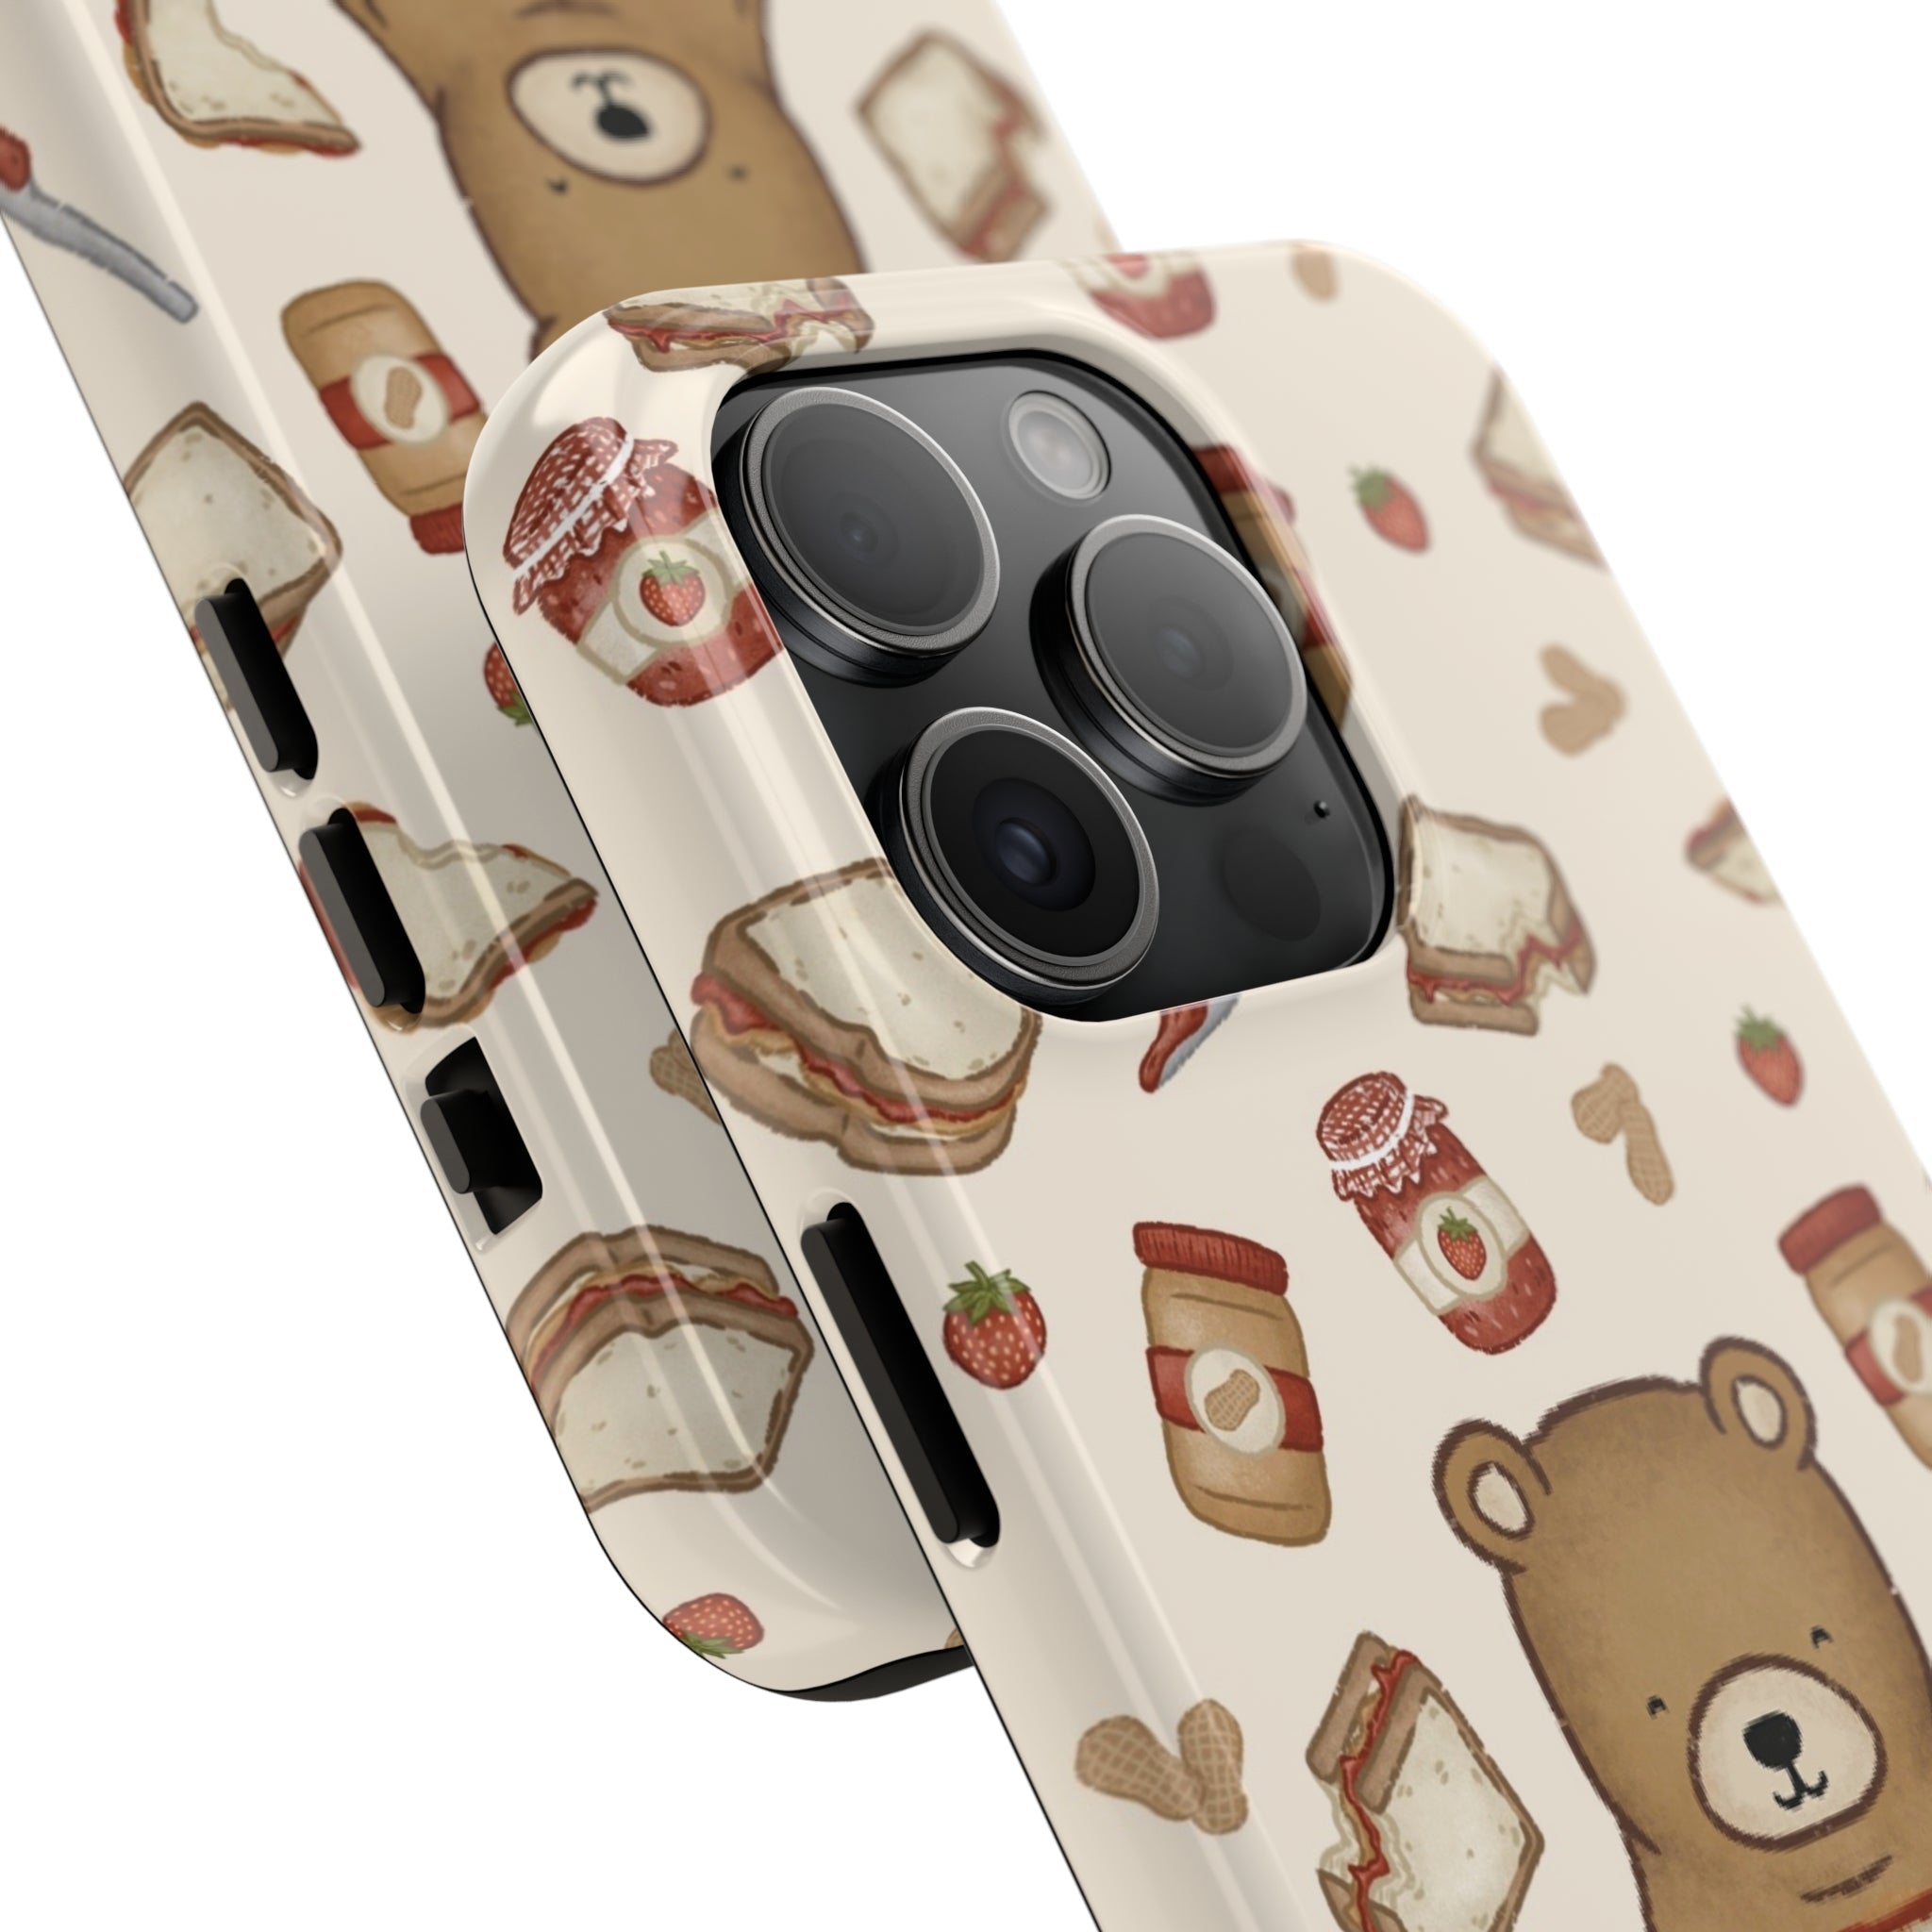 Hungry Bear Tough iPhone Case